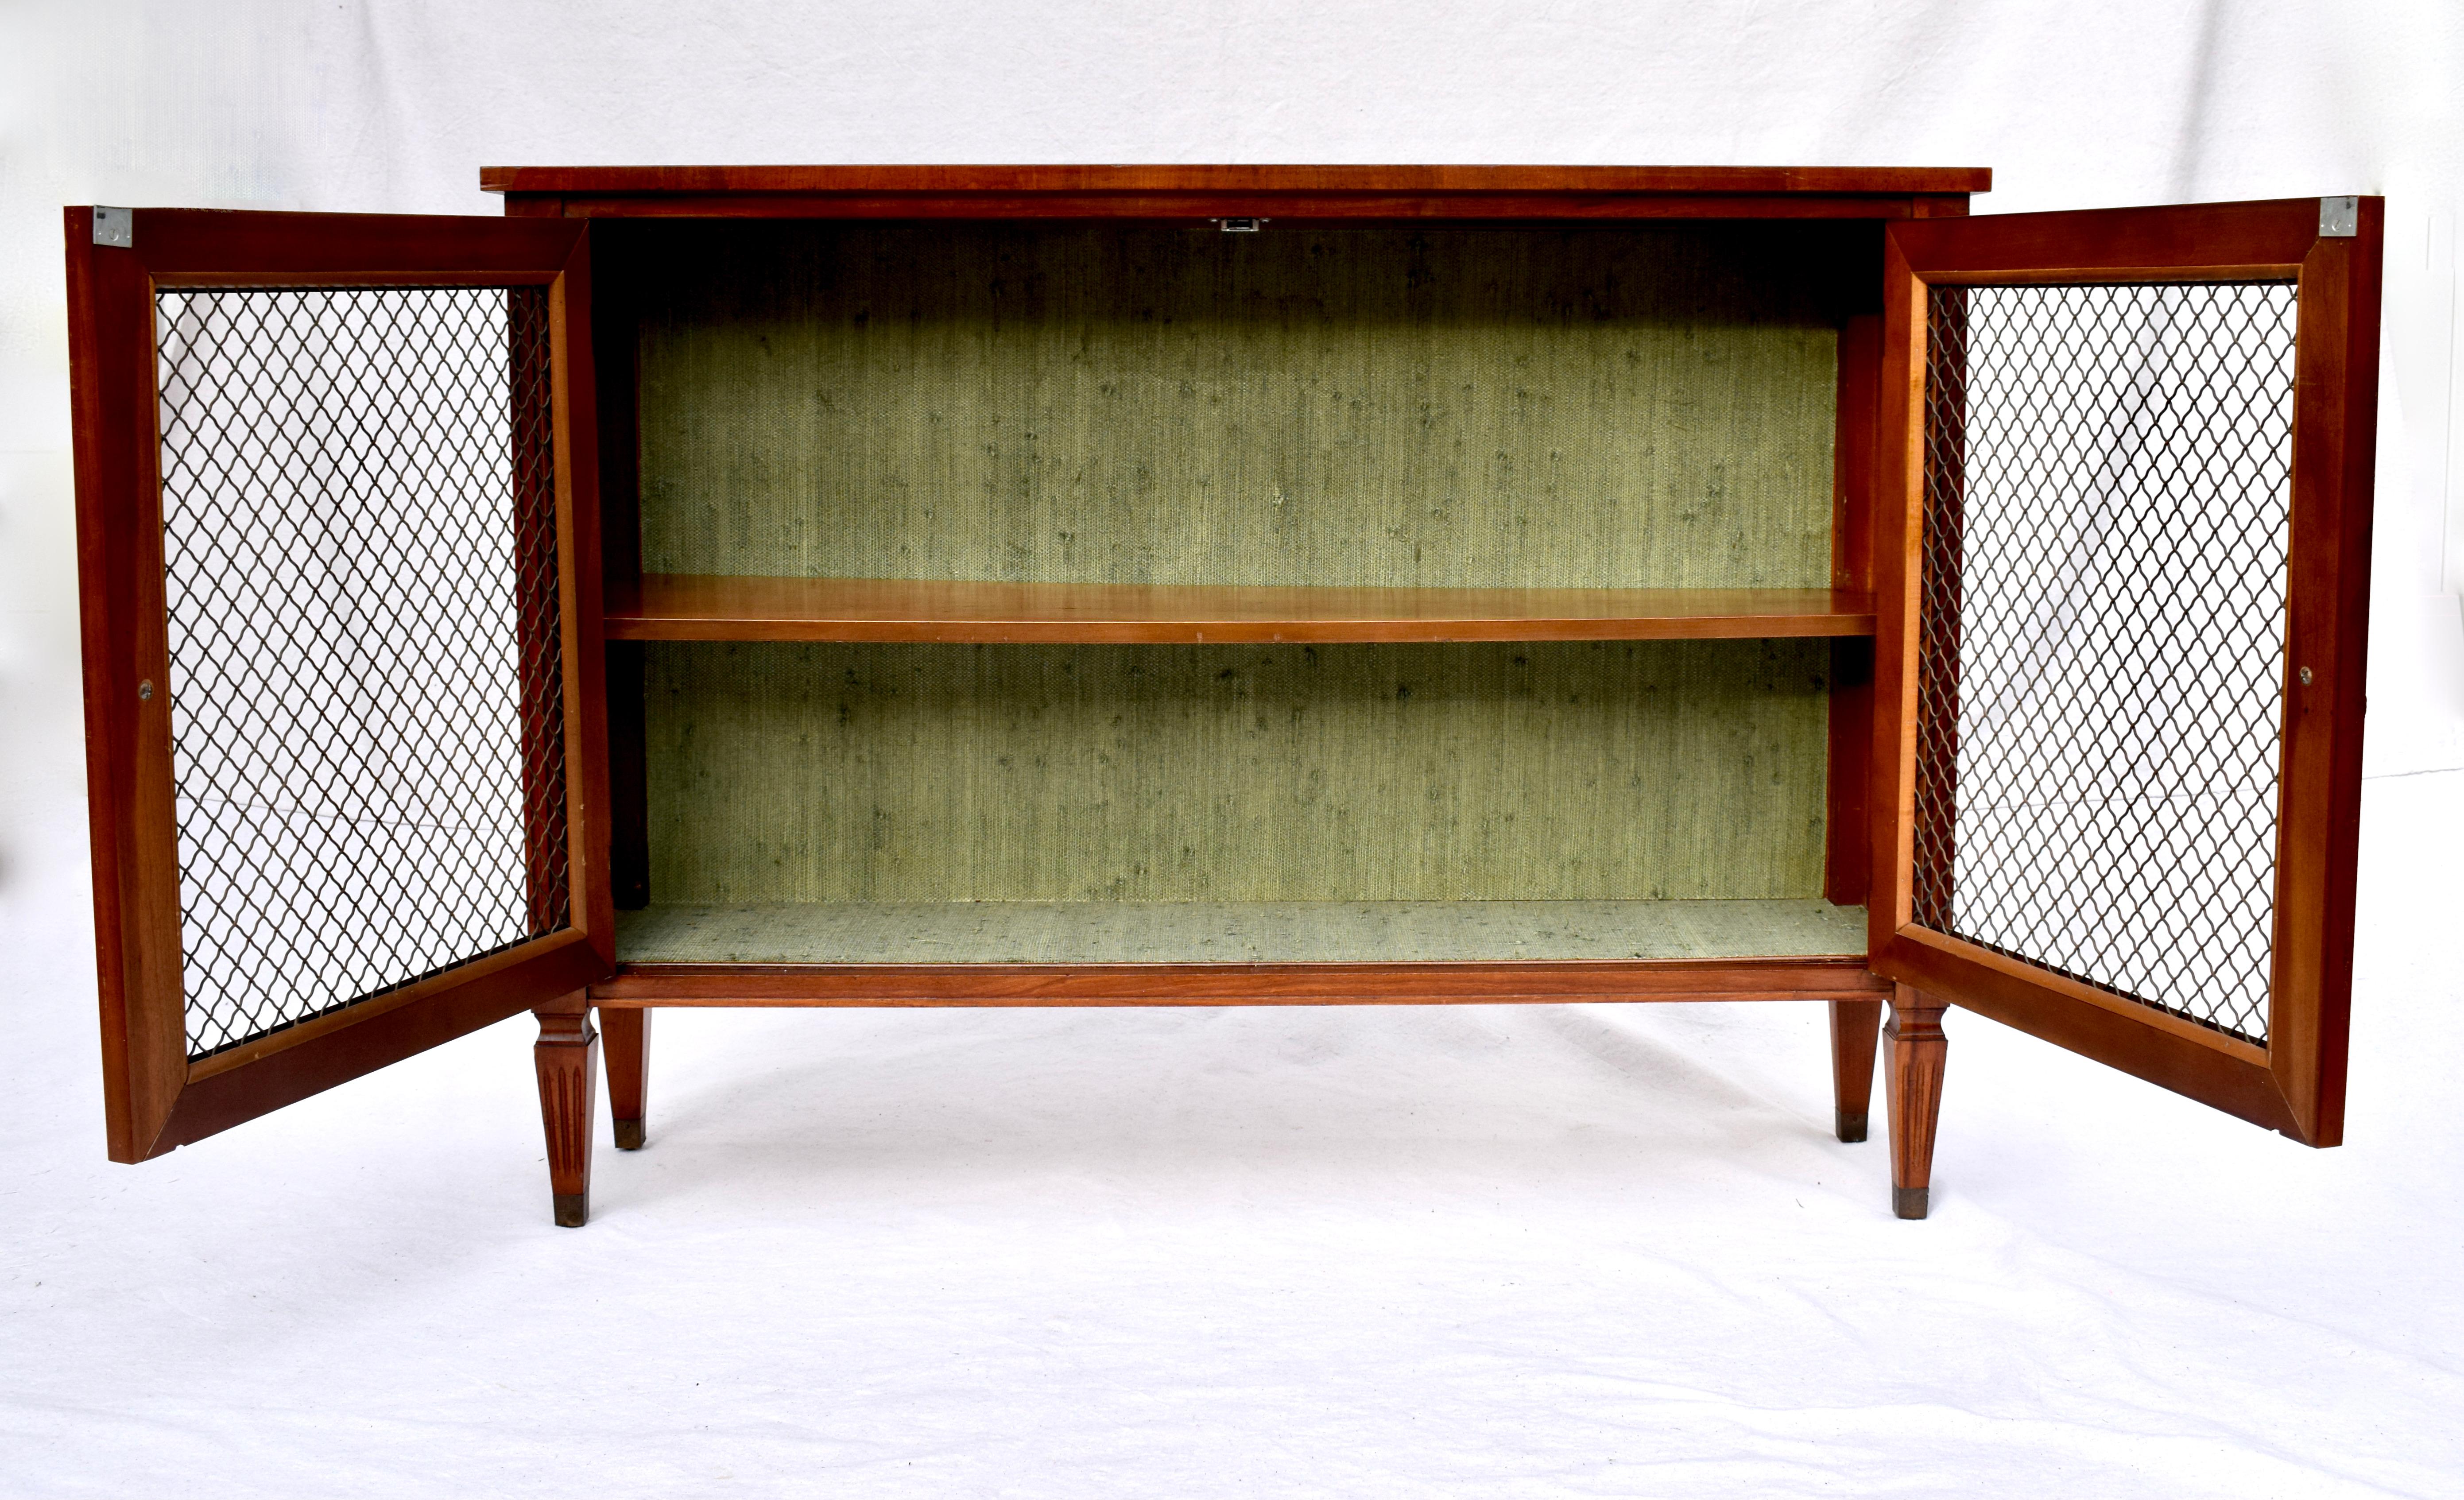 Early 20th c. Regency style walnut & mahogany display cabinet featuring Harlequin inlay top single loose adjustable shelf with two brass grill panel doors & green grasscloth lined interior. Original fully detailed finish with brass capped feet